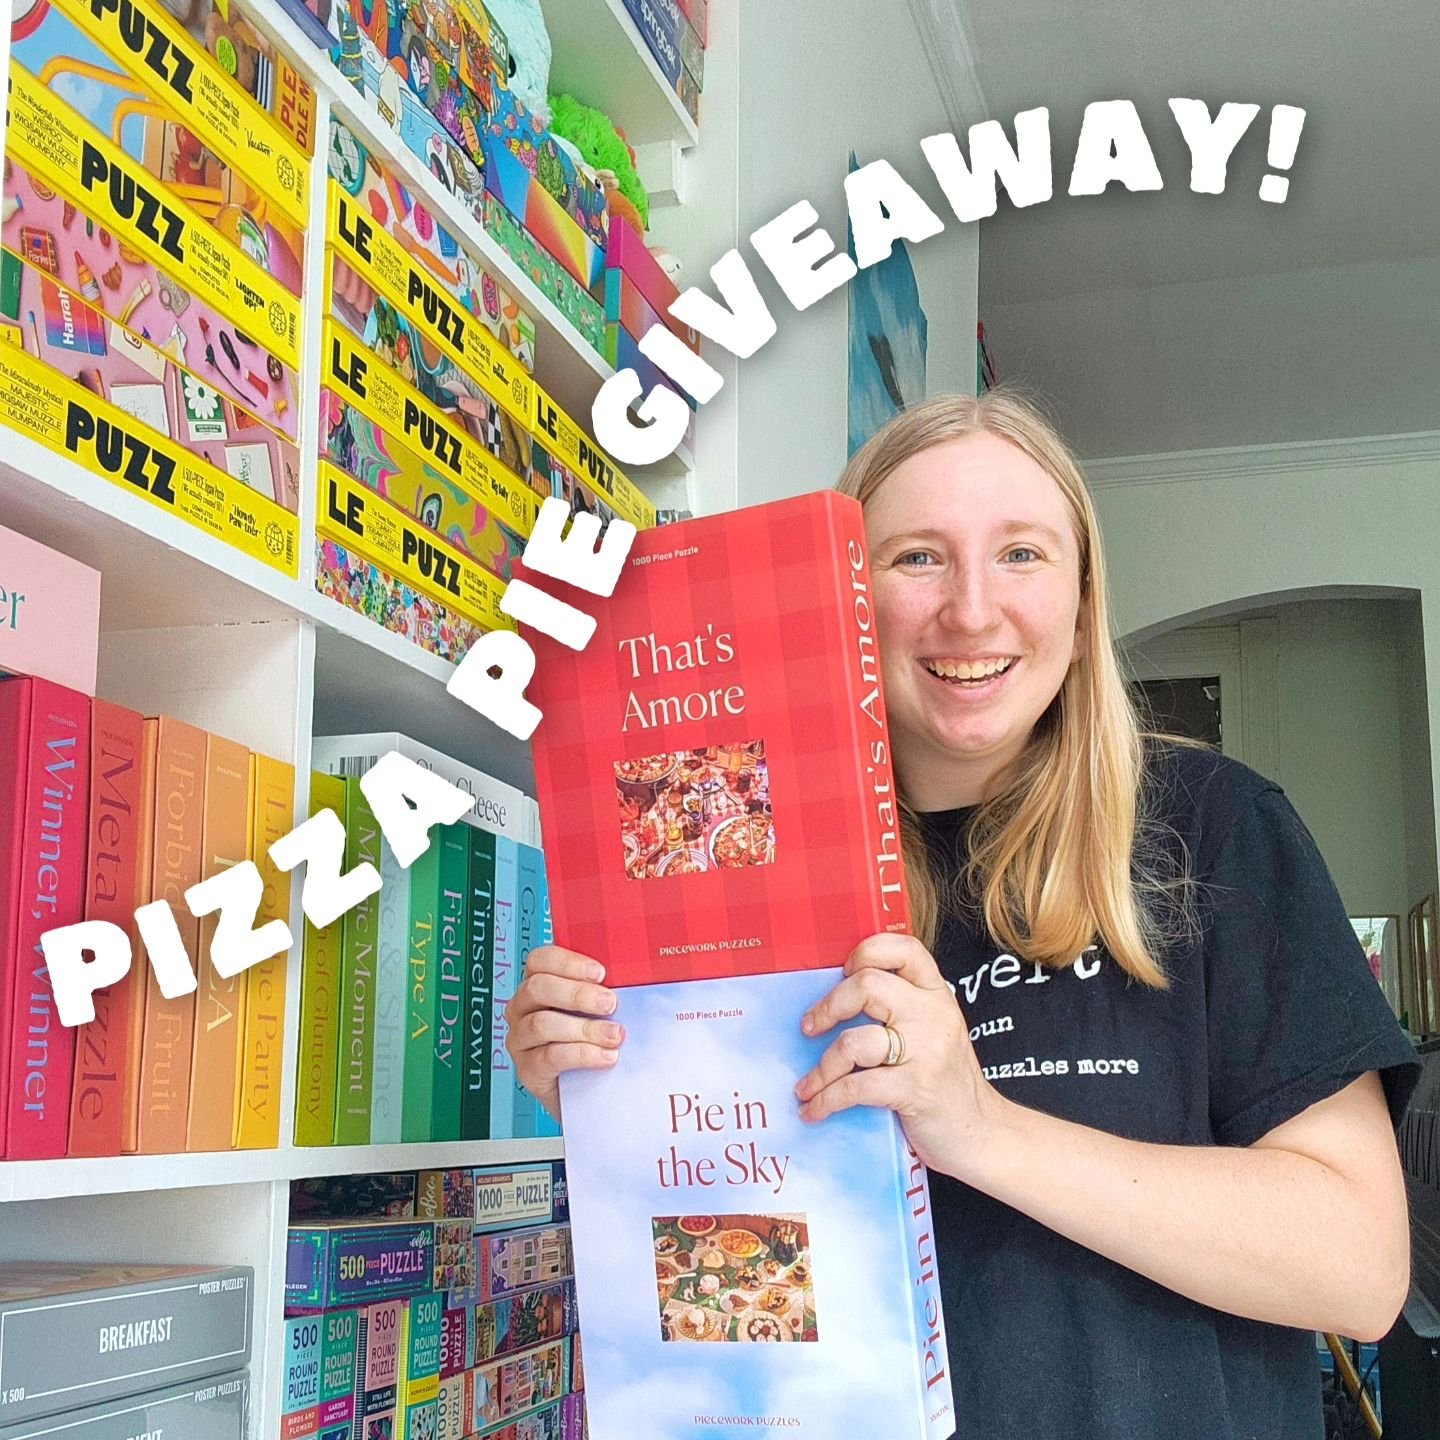 It's time for a PIZZA PIE giveaway!! 🥧🍕

In celebration of achieving over 1700 followers, it's time for a giveaway! 

The winner will receive 2 Piecework puzzles: Pie in the Sky and That's Amore!

If you haven't tried a Piecework or don't have thes